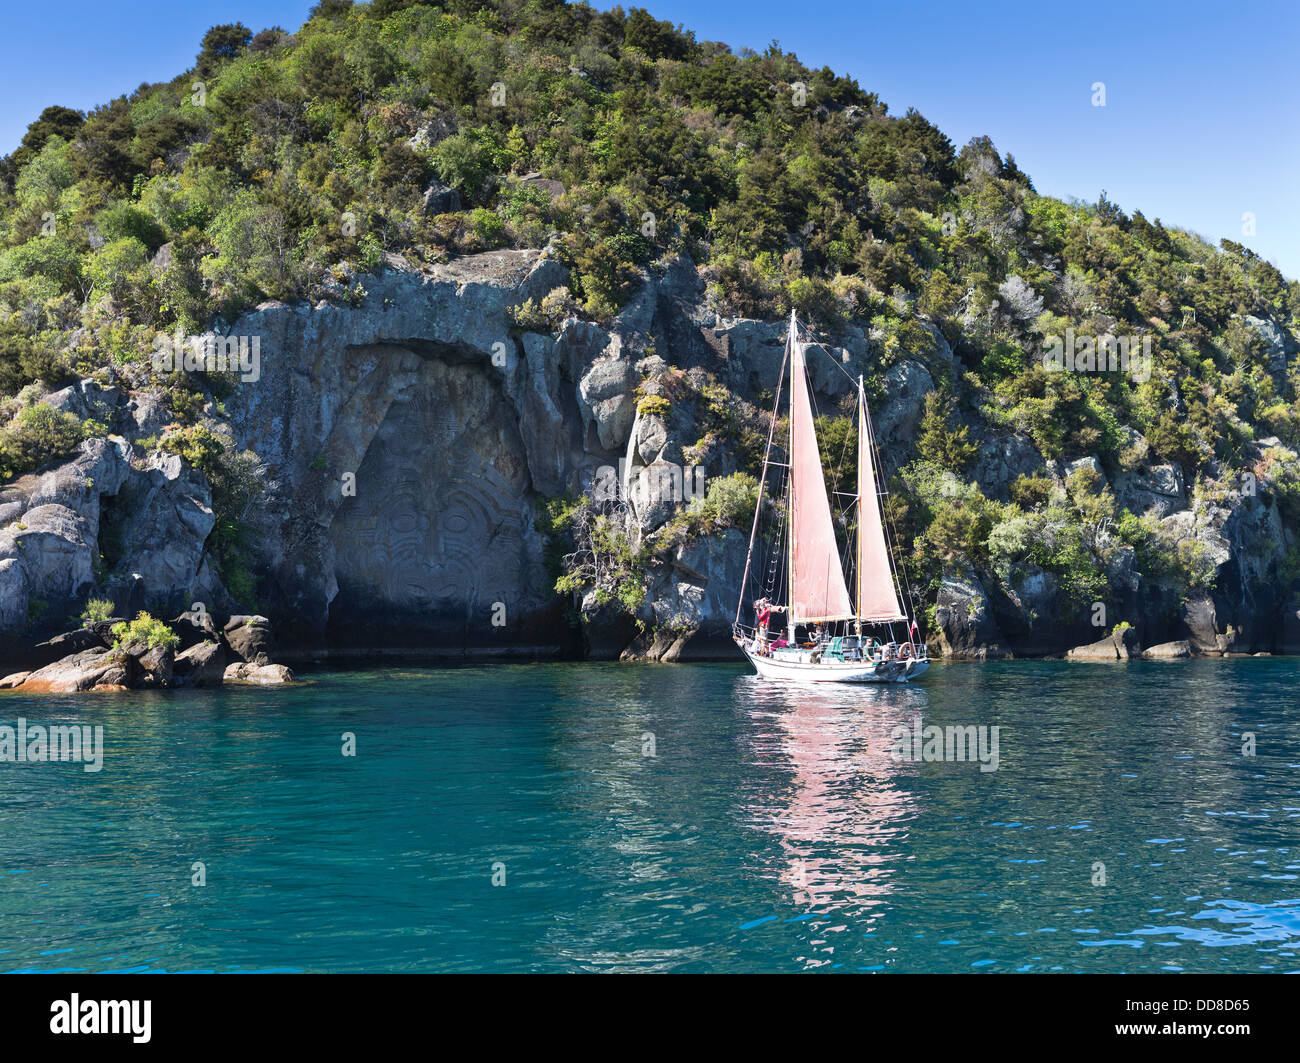 dh Maori rock carving LAKE TAUPO NEW ZEALAND Fearless sailing boat trip tourists tourism sight seeing tour Stock Photo